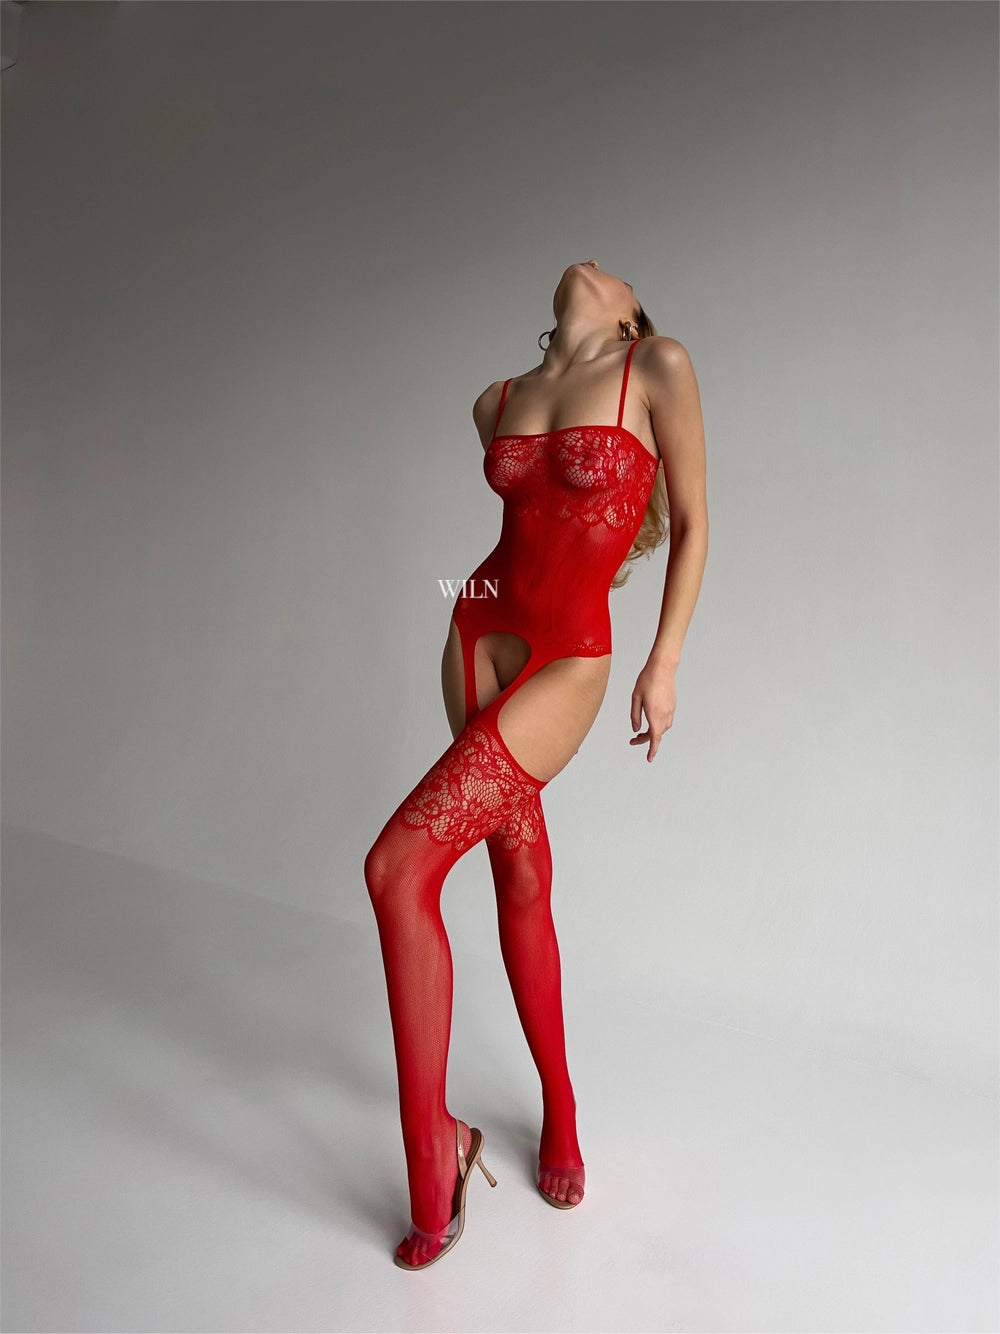 ANON SECRETS - STRIPPED BODYSTOCKING IN RED